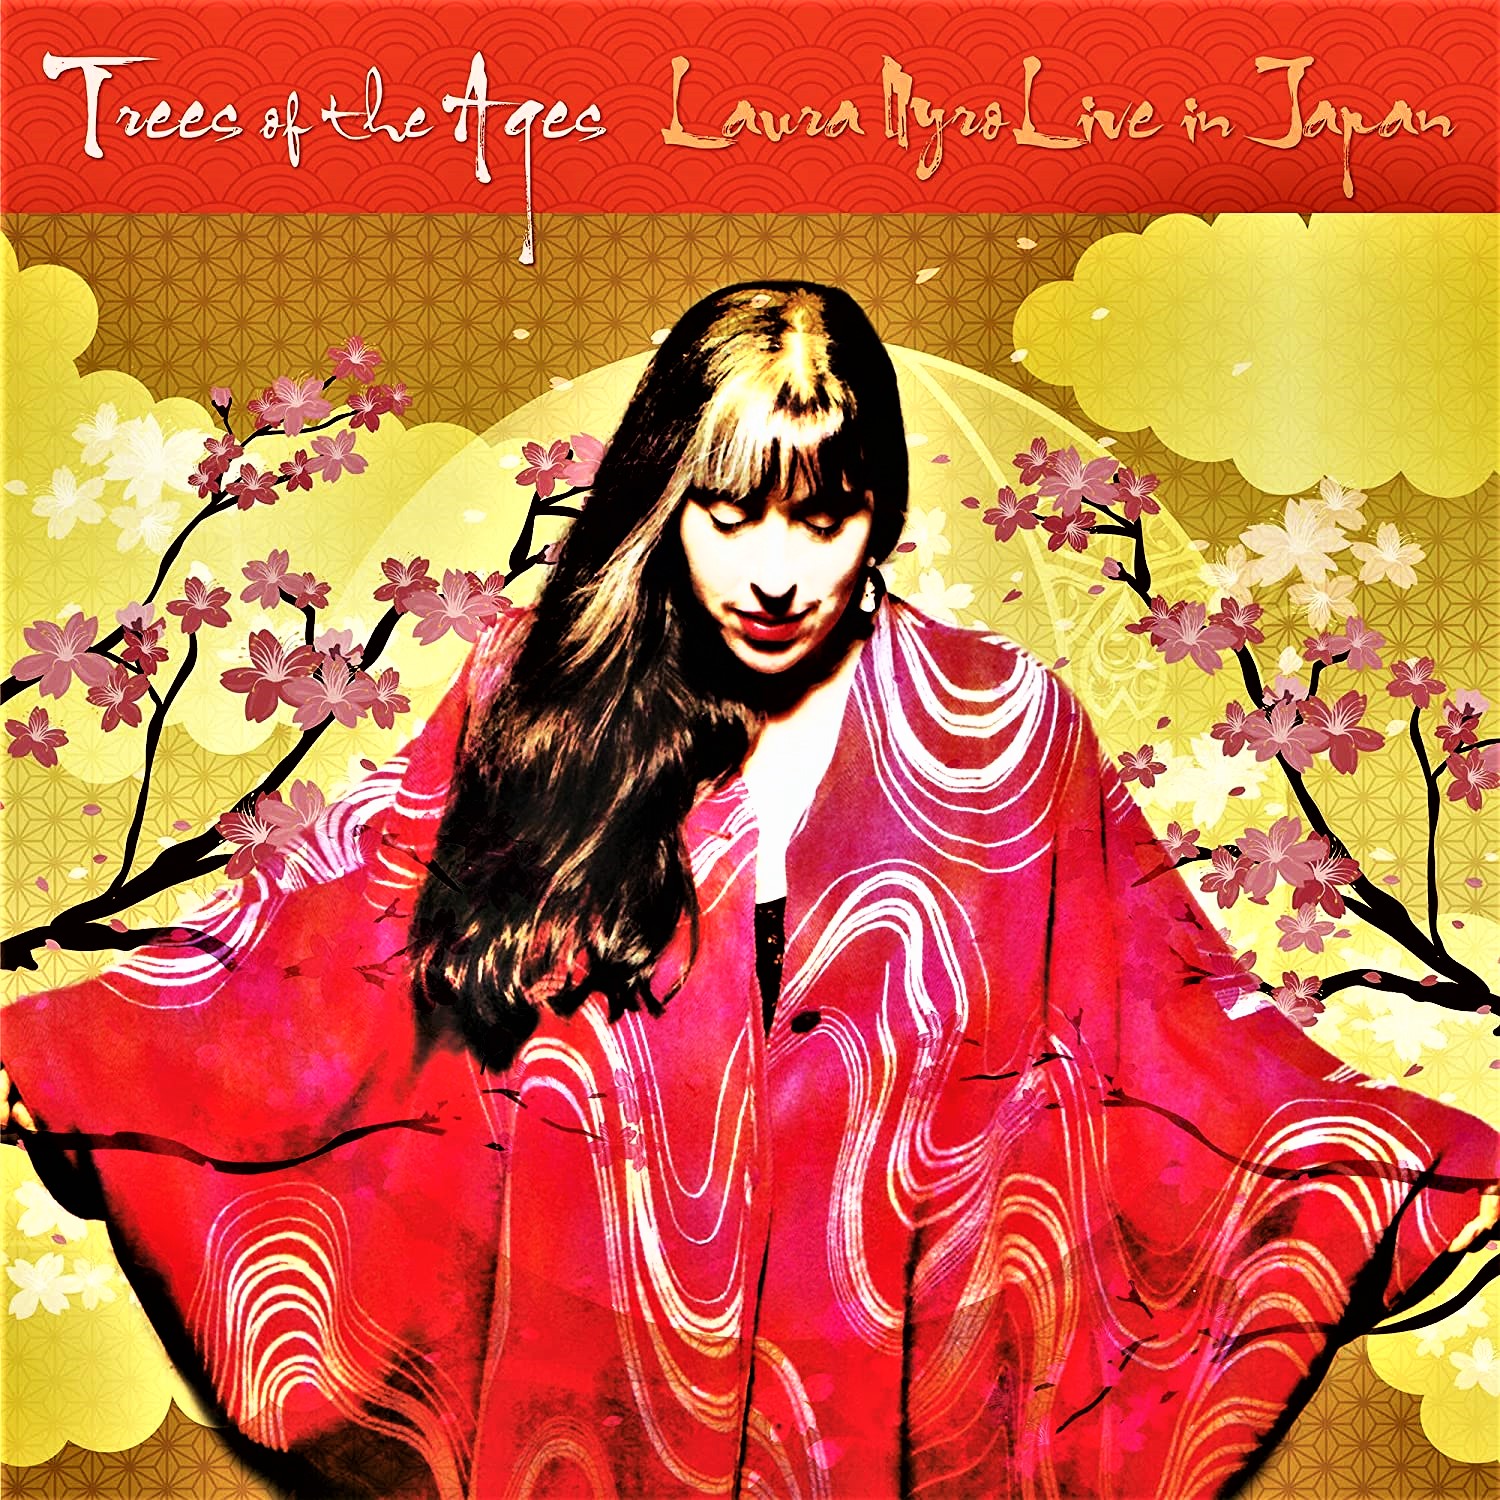 Another Reason to Rejoice: Trees of the Ages, Laura Nyro Live in Japan